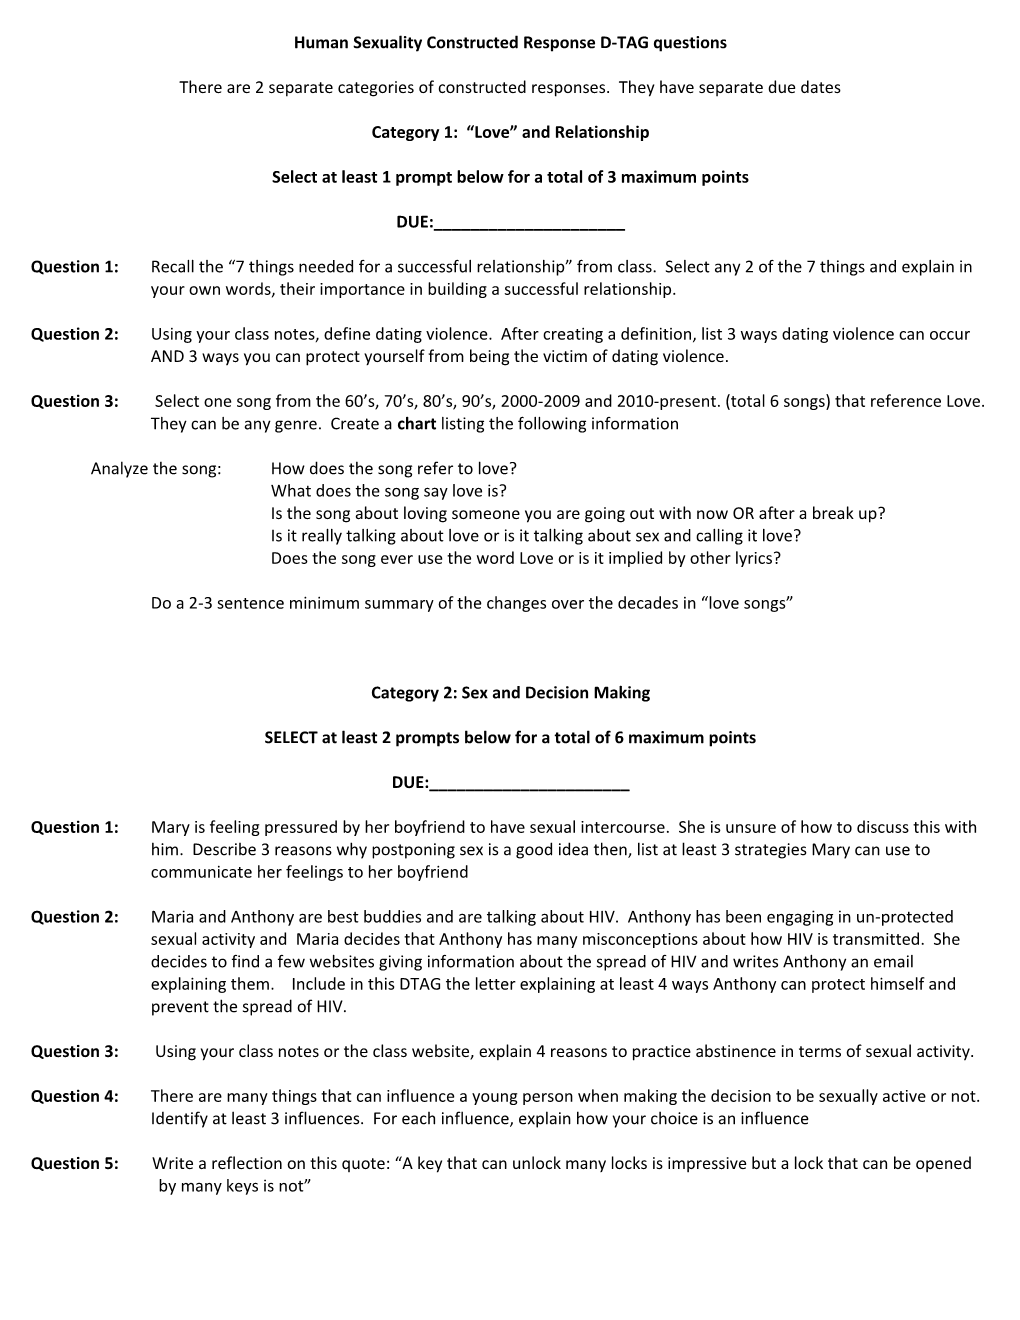 Human Sexuality Constructed Response D-TAG Questions